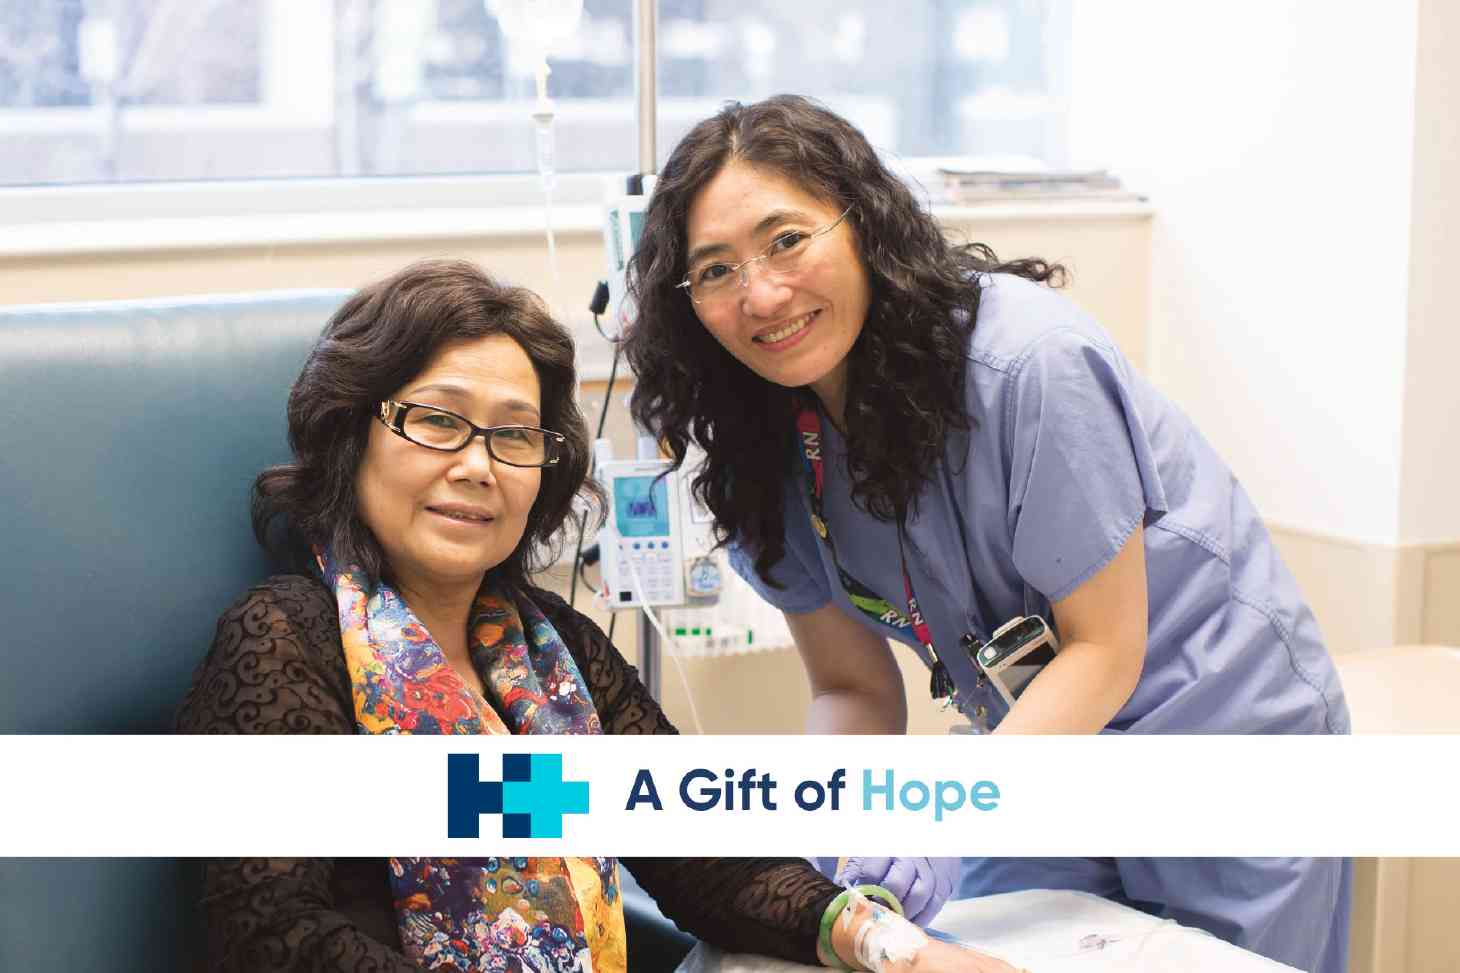 A Gift of Hope to the Humber River Health Foundation